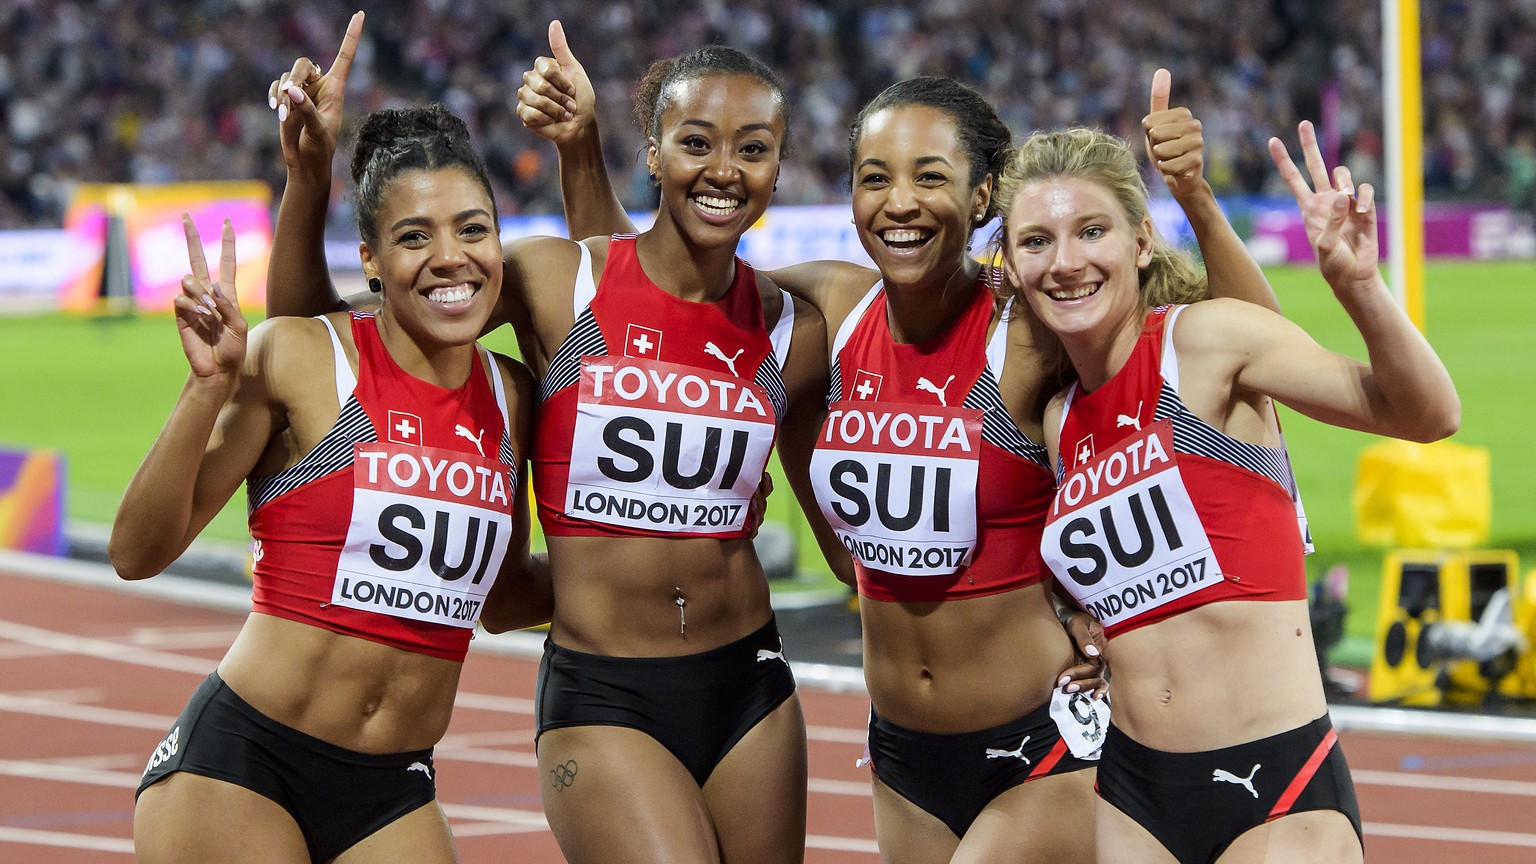 From left to right, Mujinga Kambundji, Sarah Atcho, Salome Kora, Ajla Del Ponte from Switzerland, react during the 4x100m Relay Women Final at the IAAF World Athletics Championships at the London Stad ...